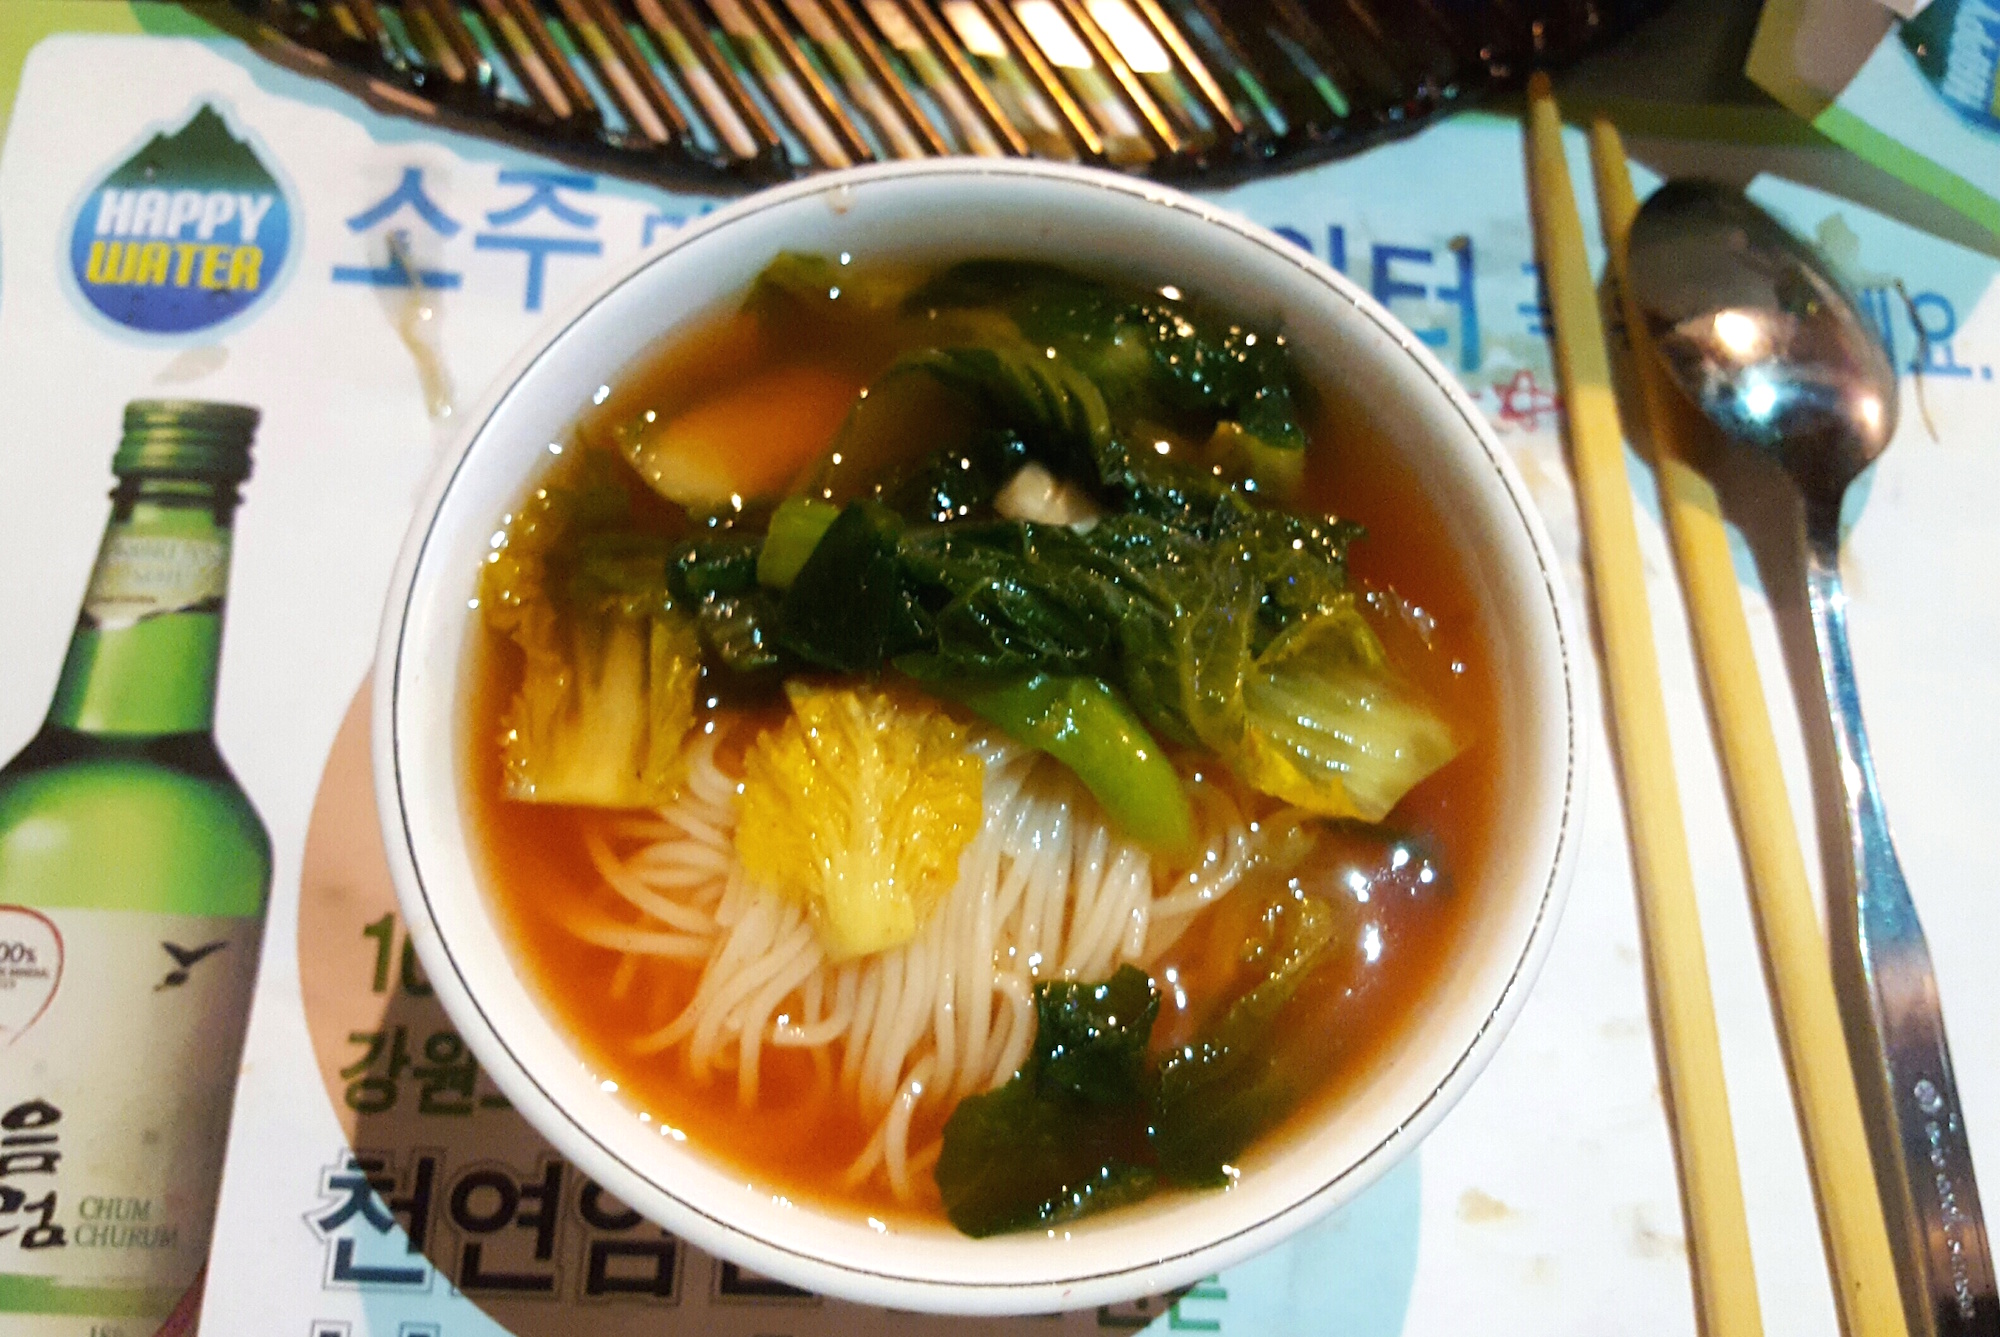 Chef Yu sometimes sends gifts from the kitchen like this bracing cold noodle soup.